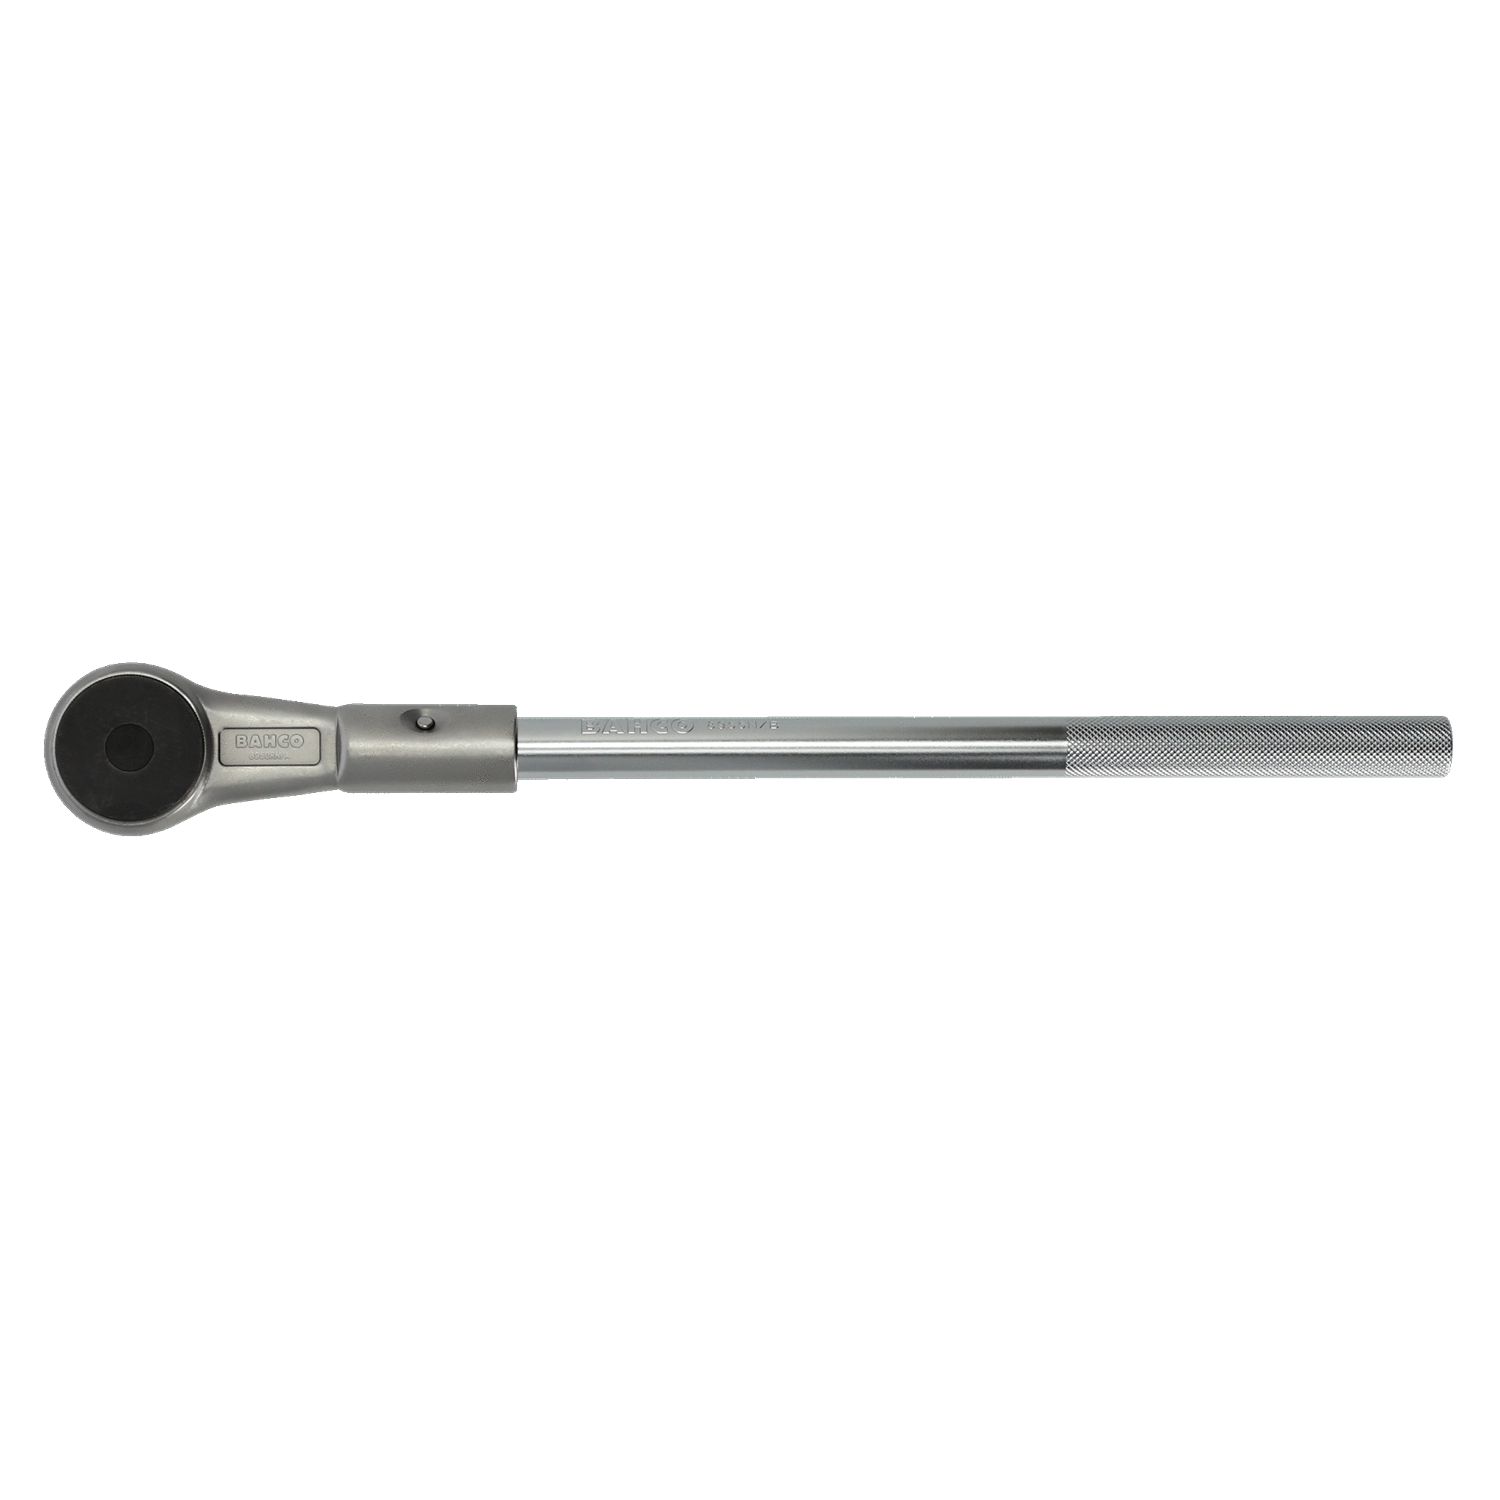 BAHCO 8950N 3/4" Round Head Reversible Ratchet with 72 Teeth - Premium Reversible Ratchet from BAHCO - Shop now at Yew Aik.